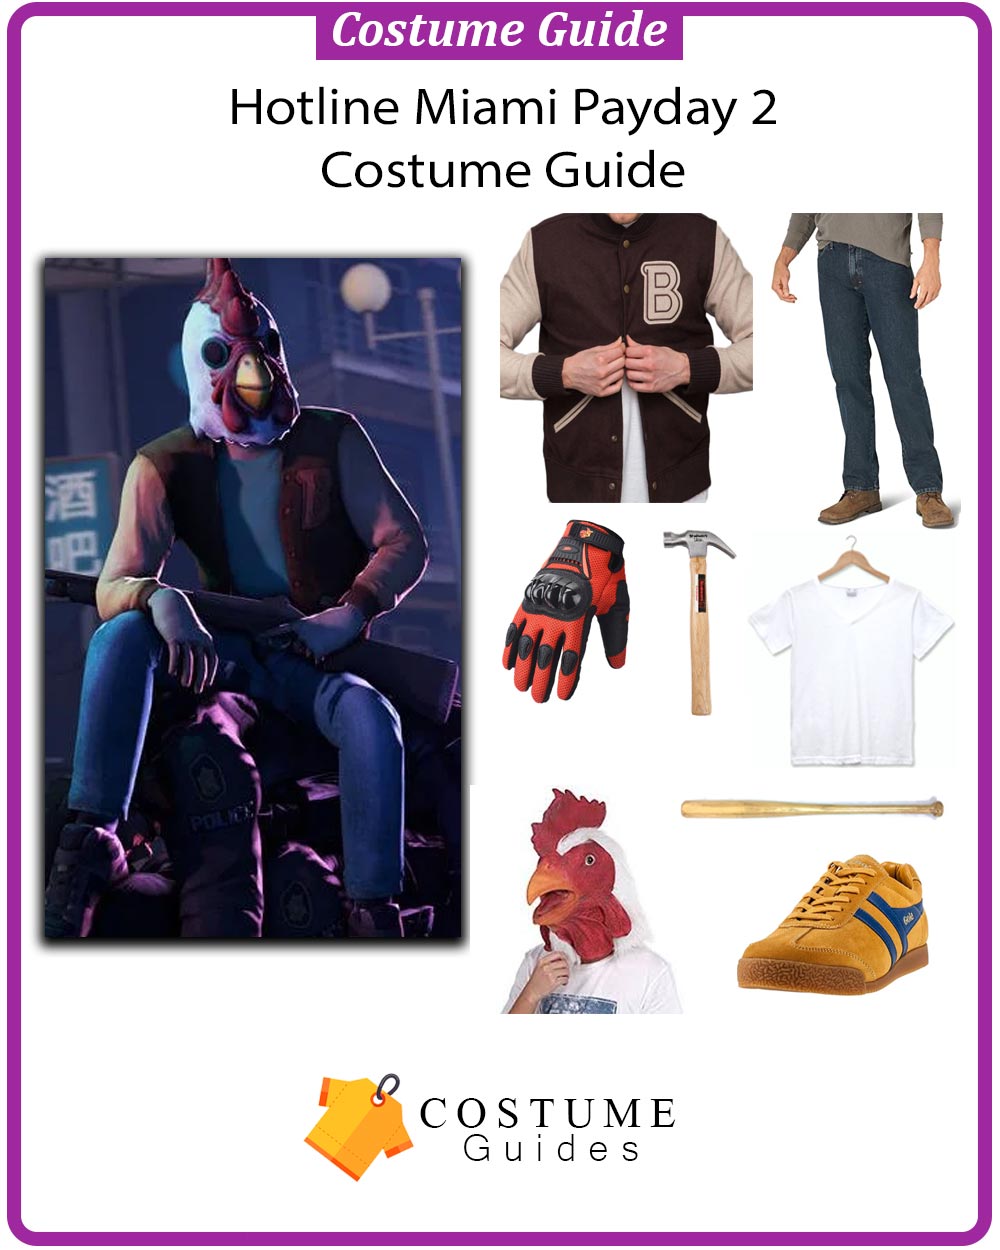 Hotline-Miami-Payday-2-Costume-Guide